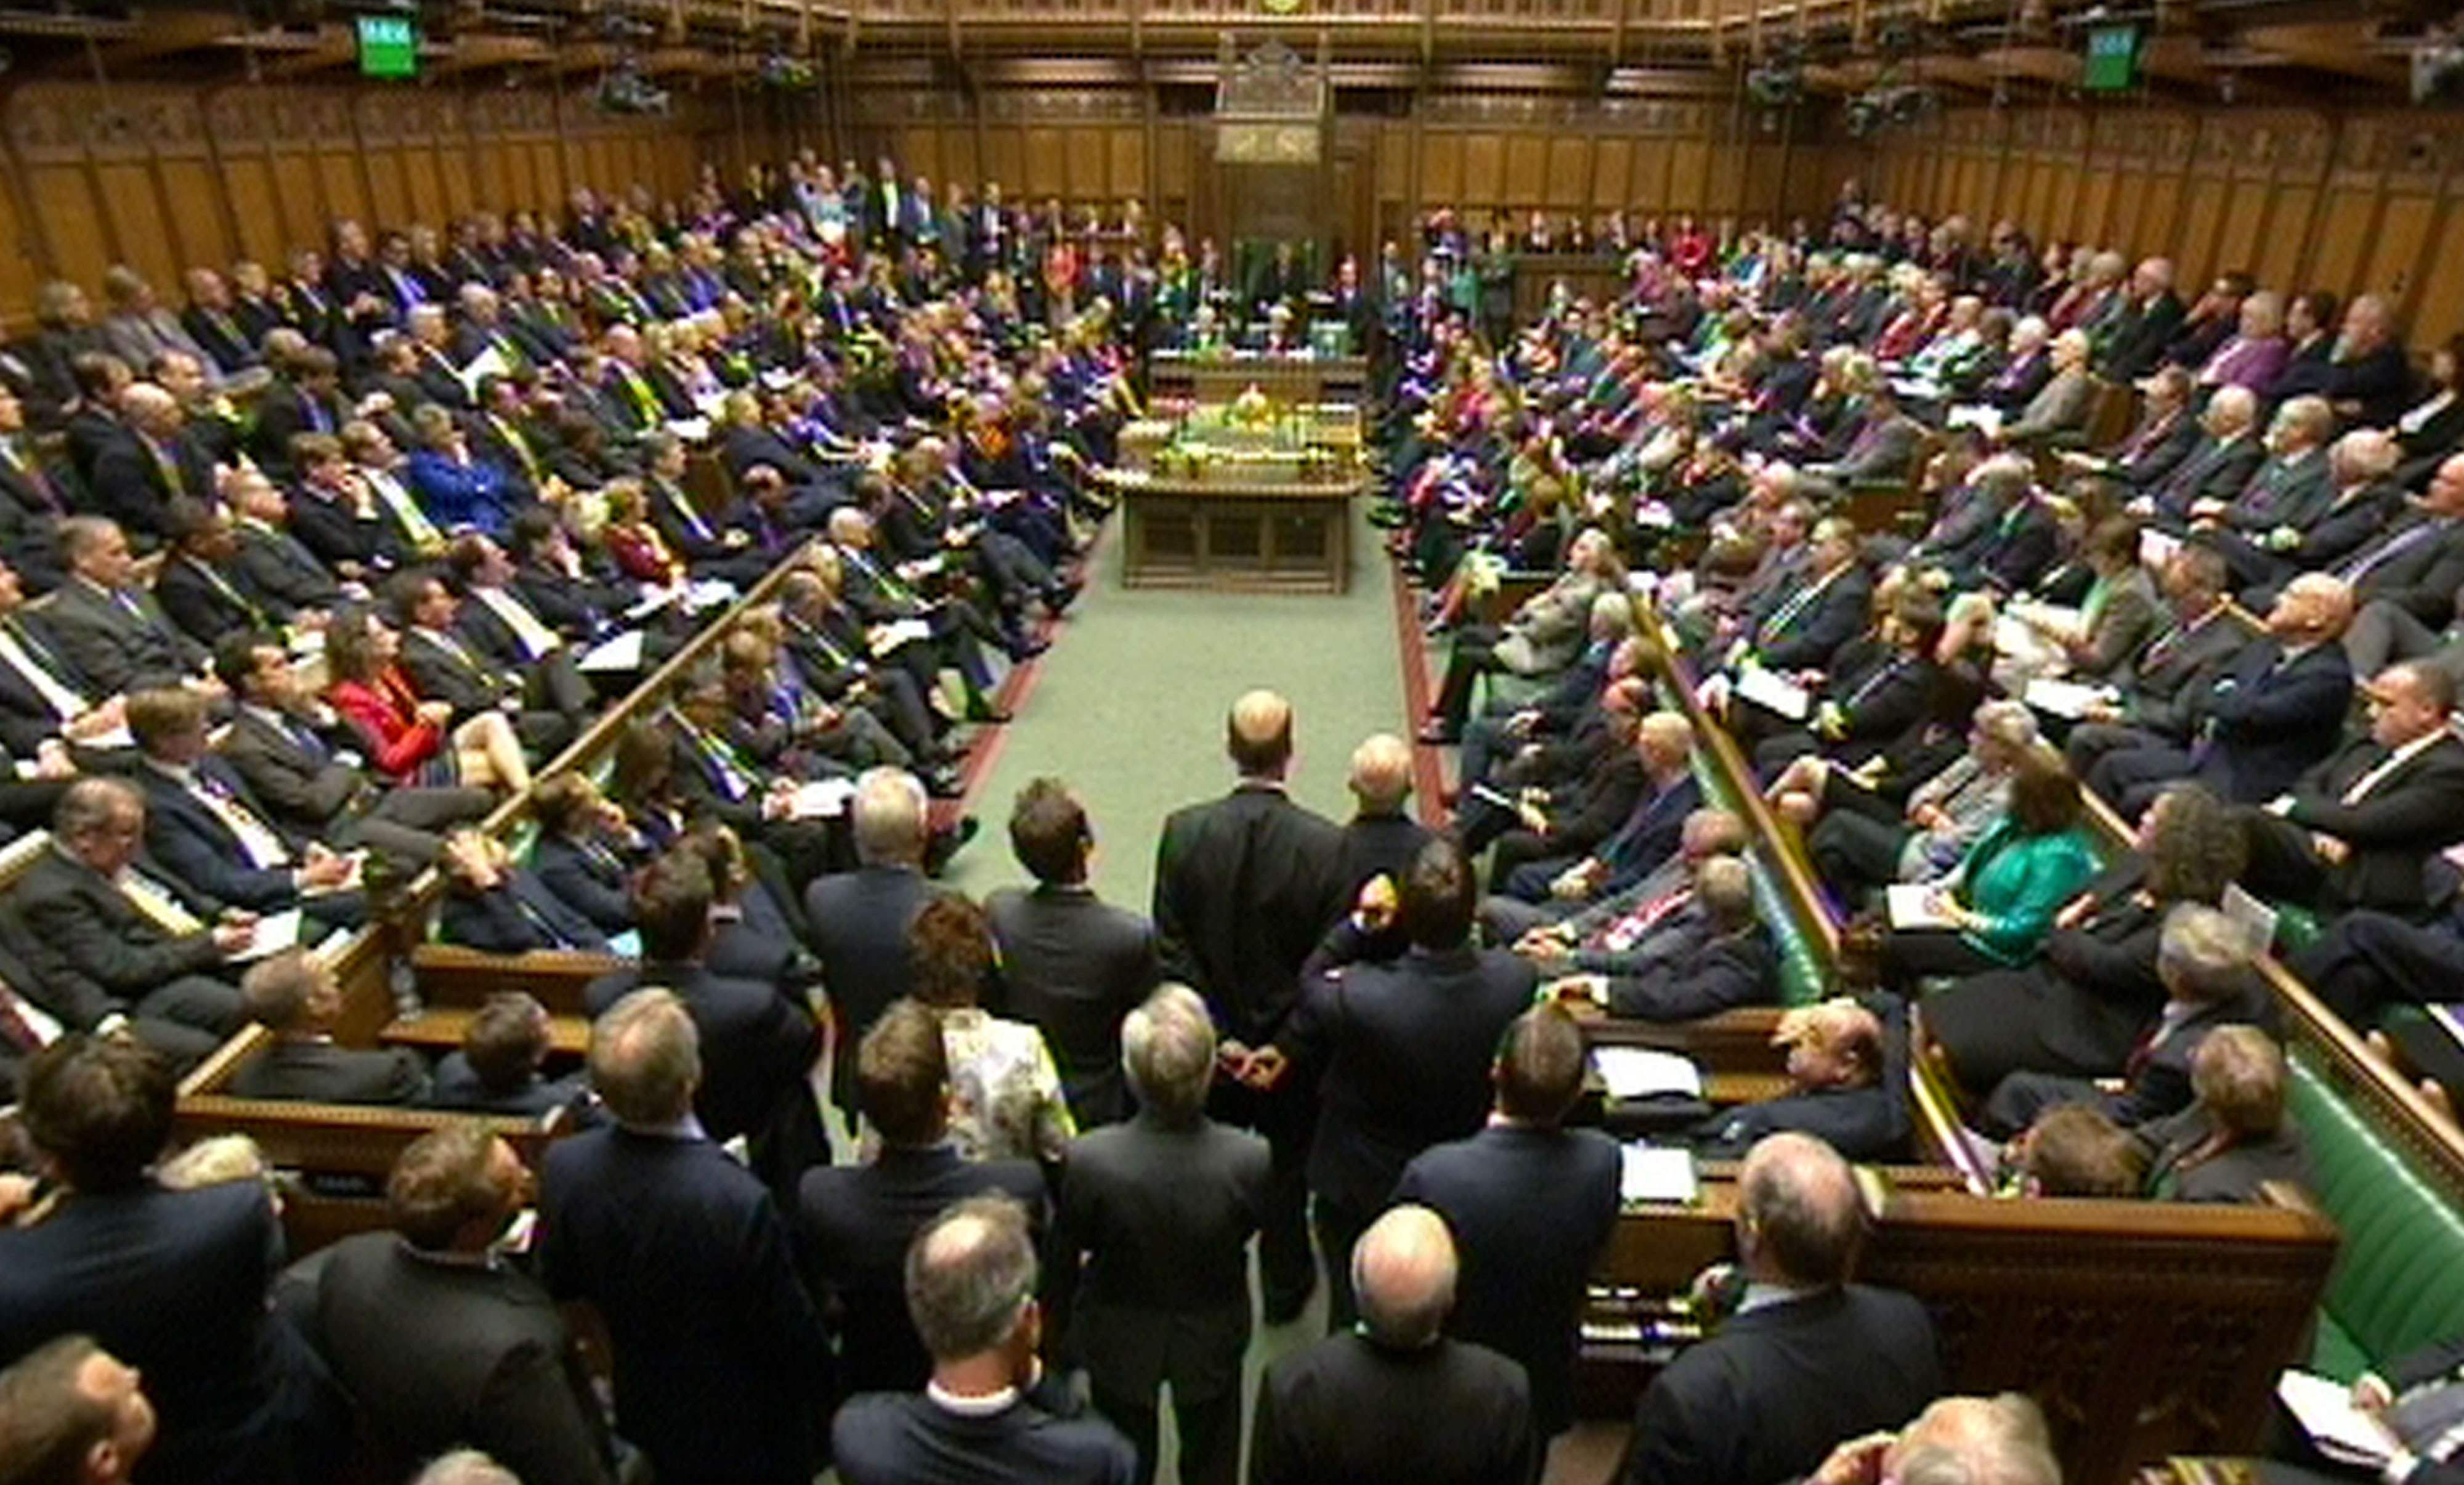 Parliament debates military action against ISIS at the House of Commons, London on Sept. 26, 2014.